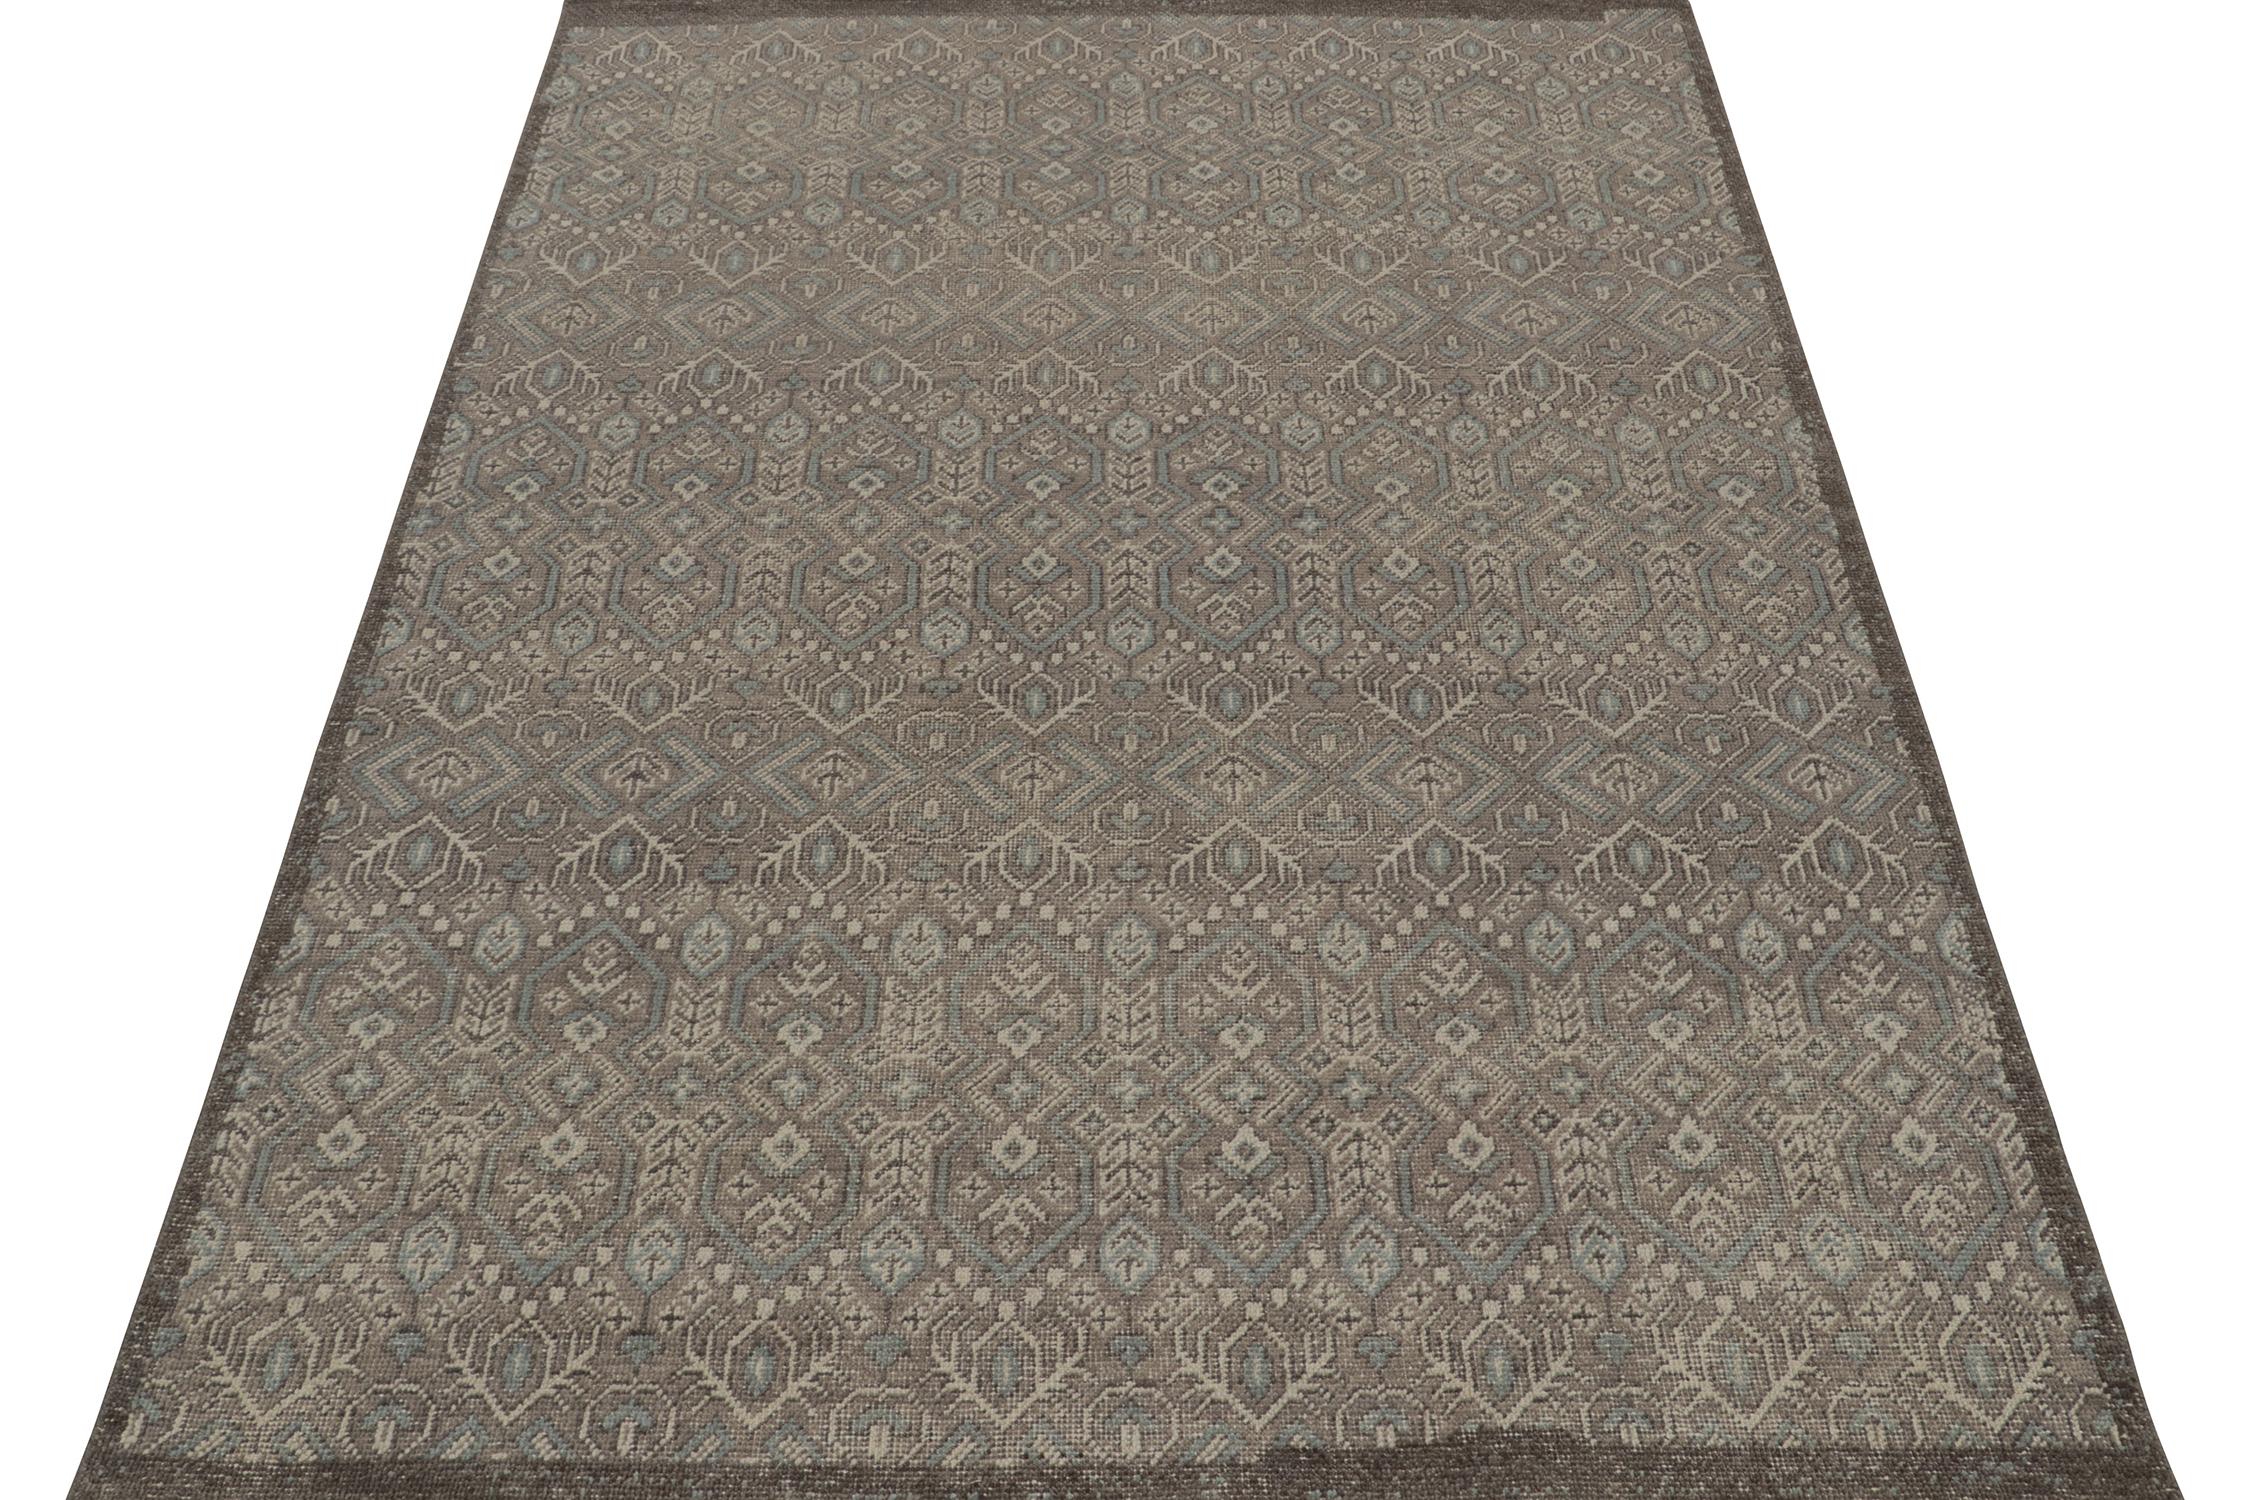 Indian Rug & Kilim’s Distressed Tribal Style Rug in Grey and Blue Geometric Patterns For Sale